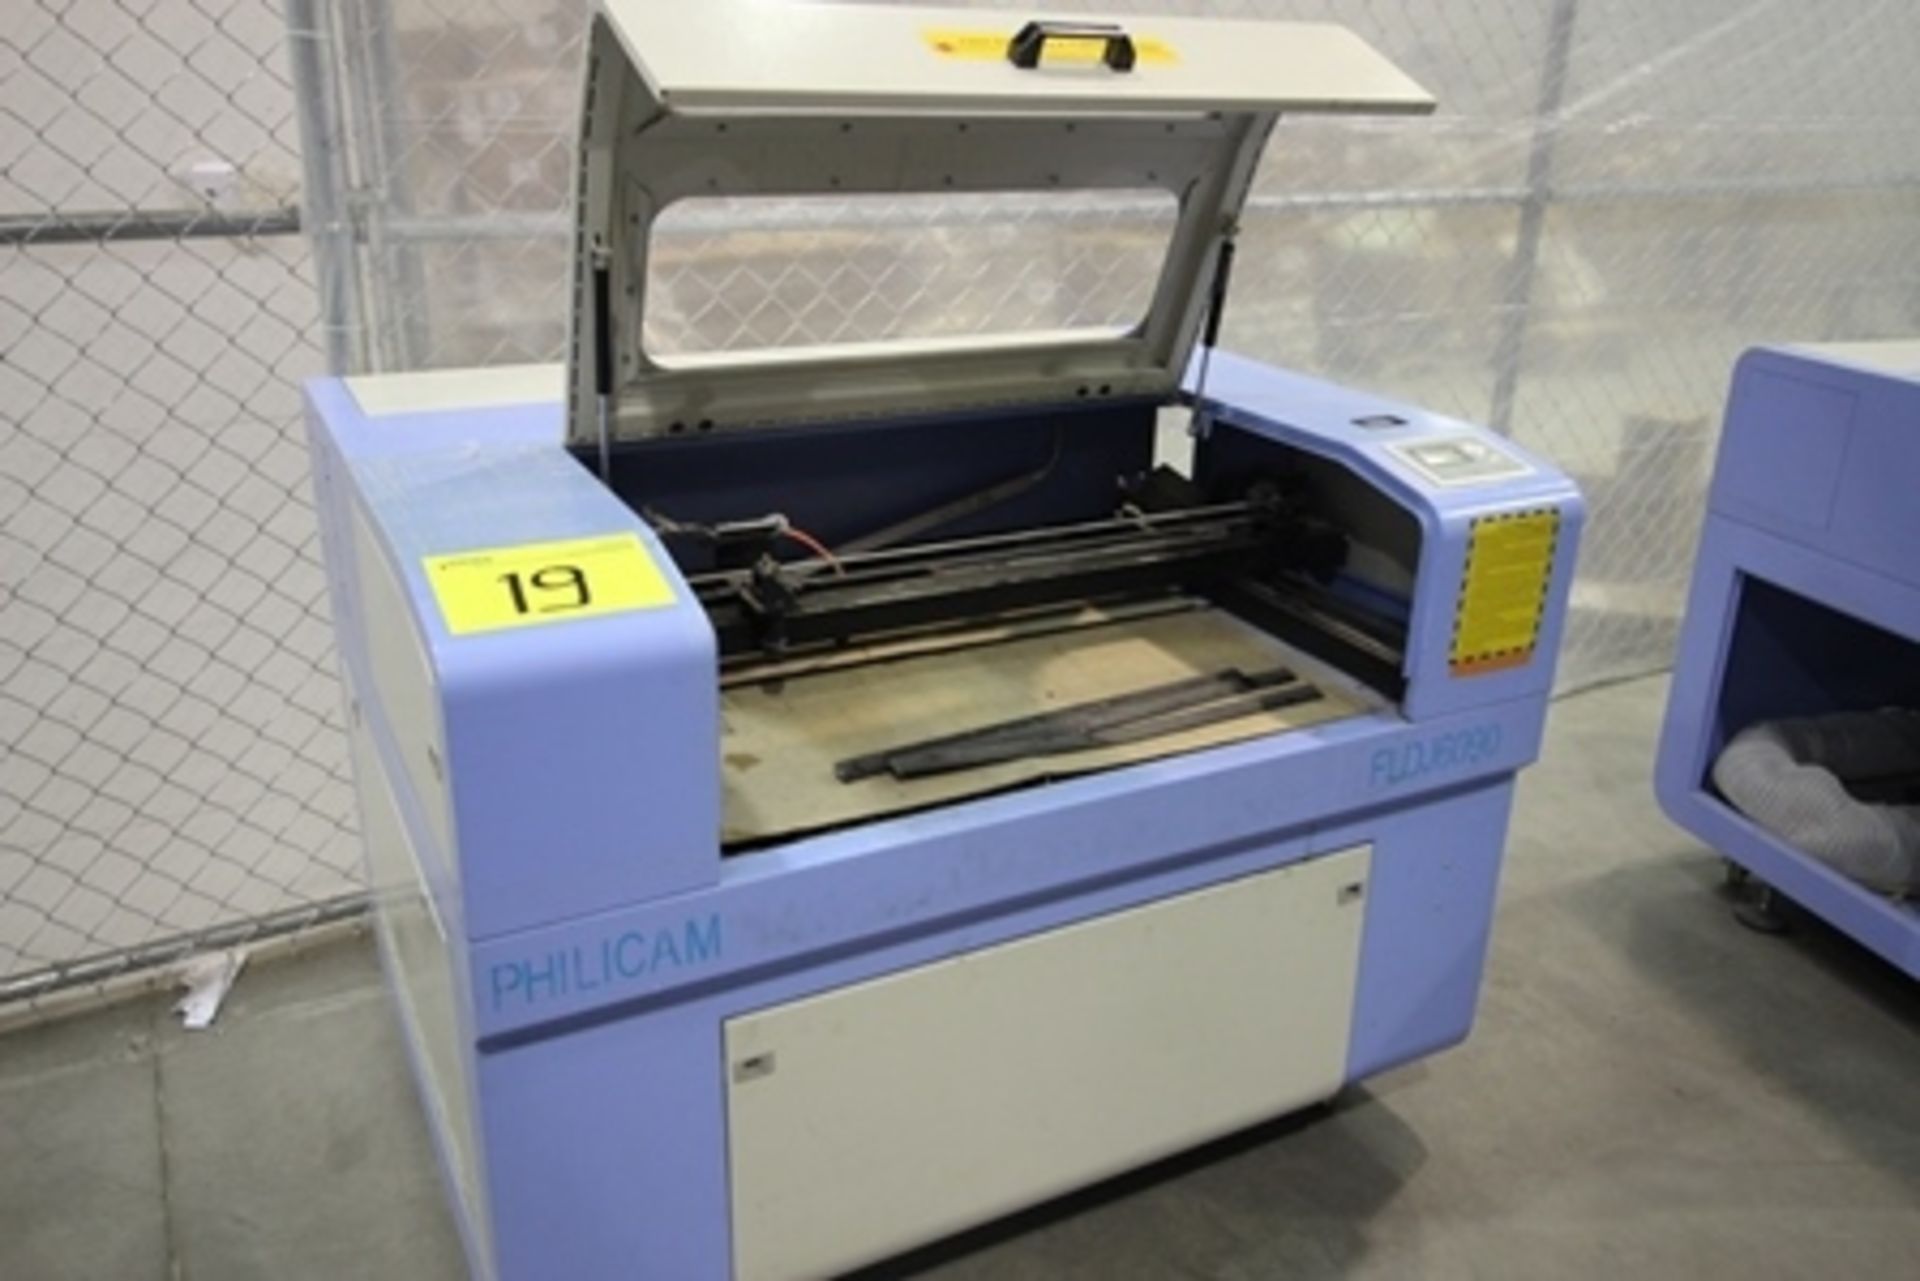 Phillican CO2 laser engraver and cutting machine, model 6090. Laser power: 80w, 2Kw. - Image 6 of 18